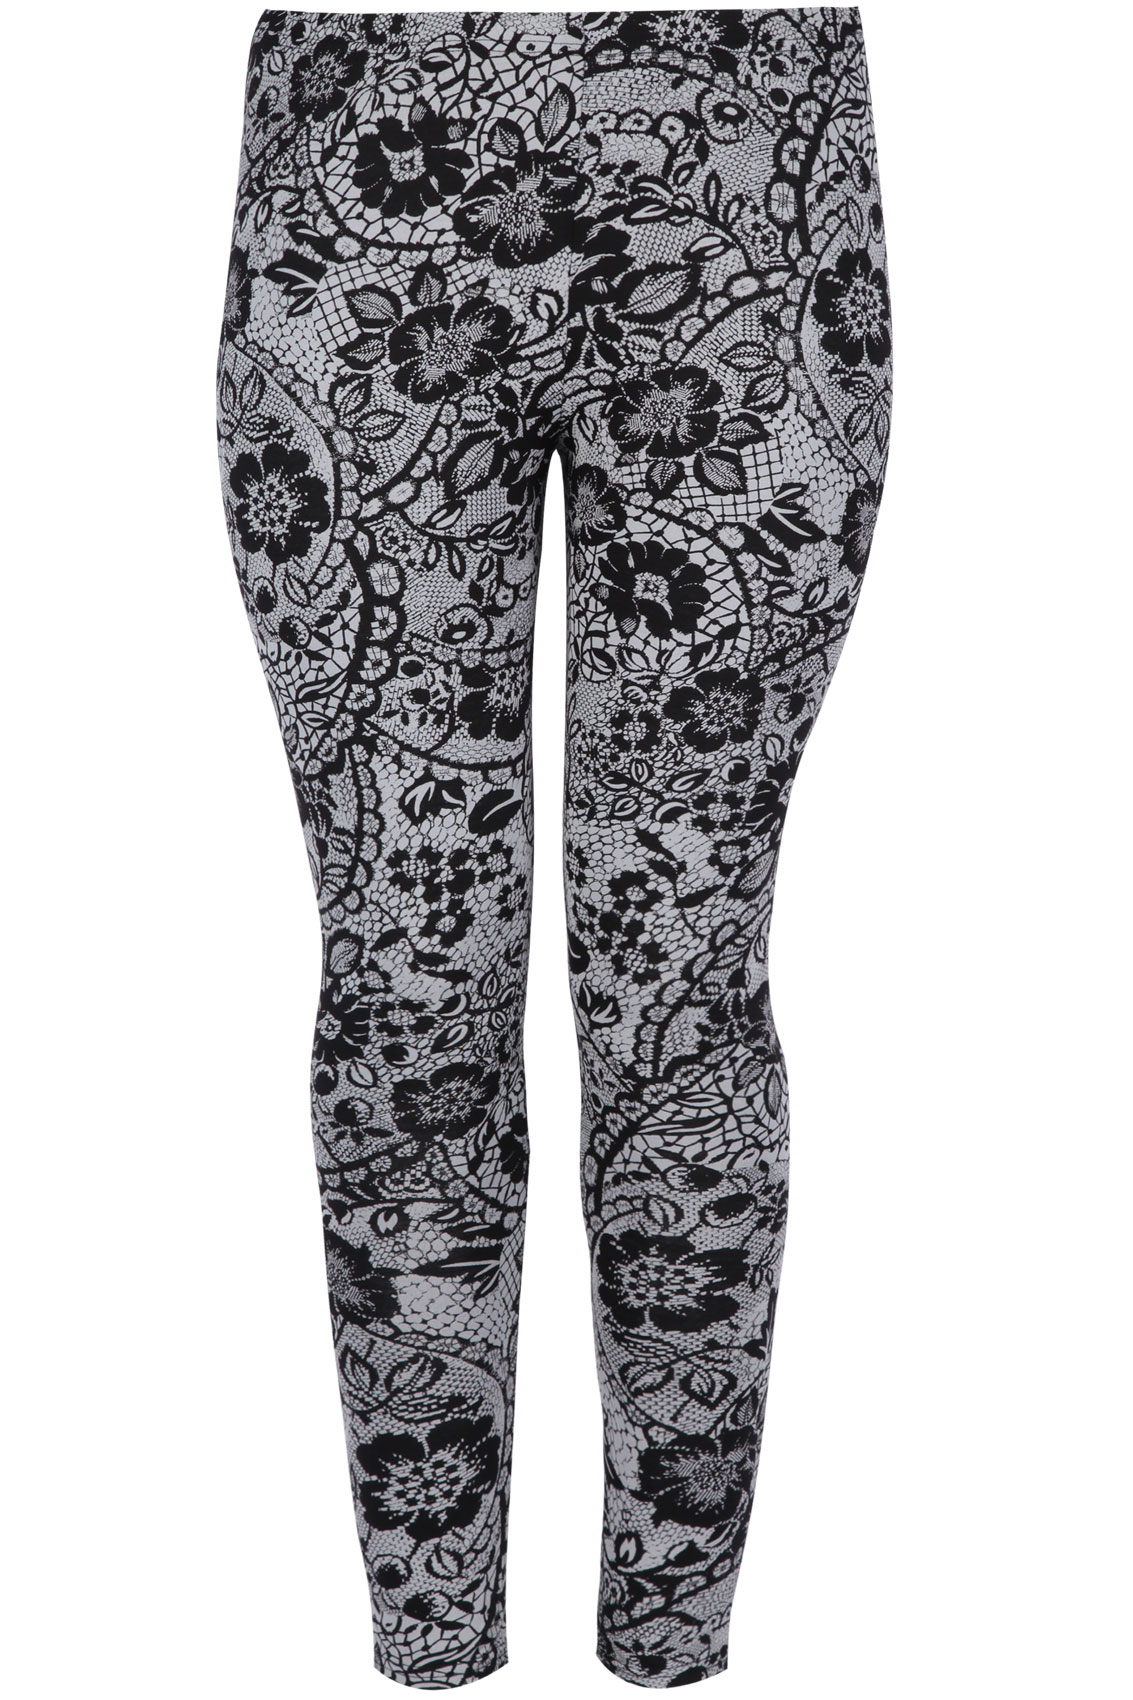 Grey And Black Floral Lace Print Full Length Leggings plus size 16,18 ...